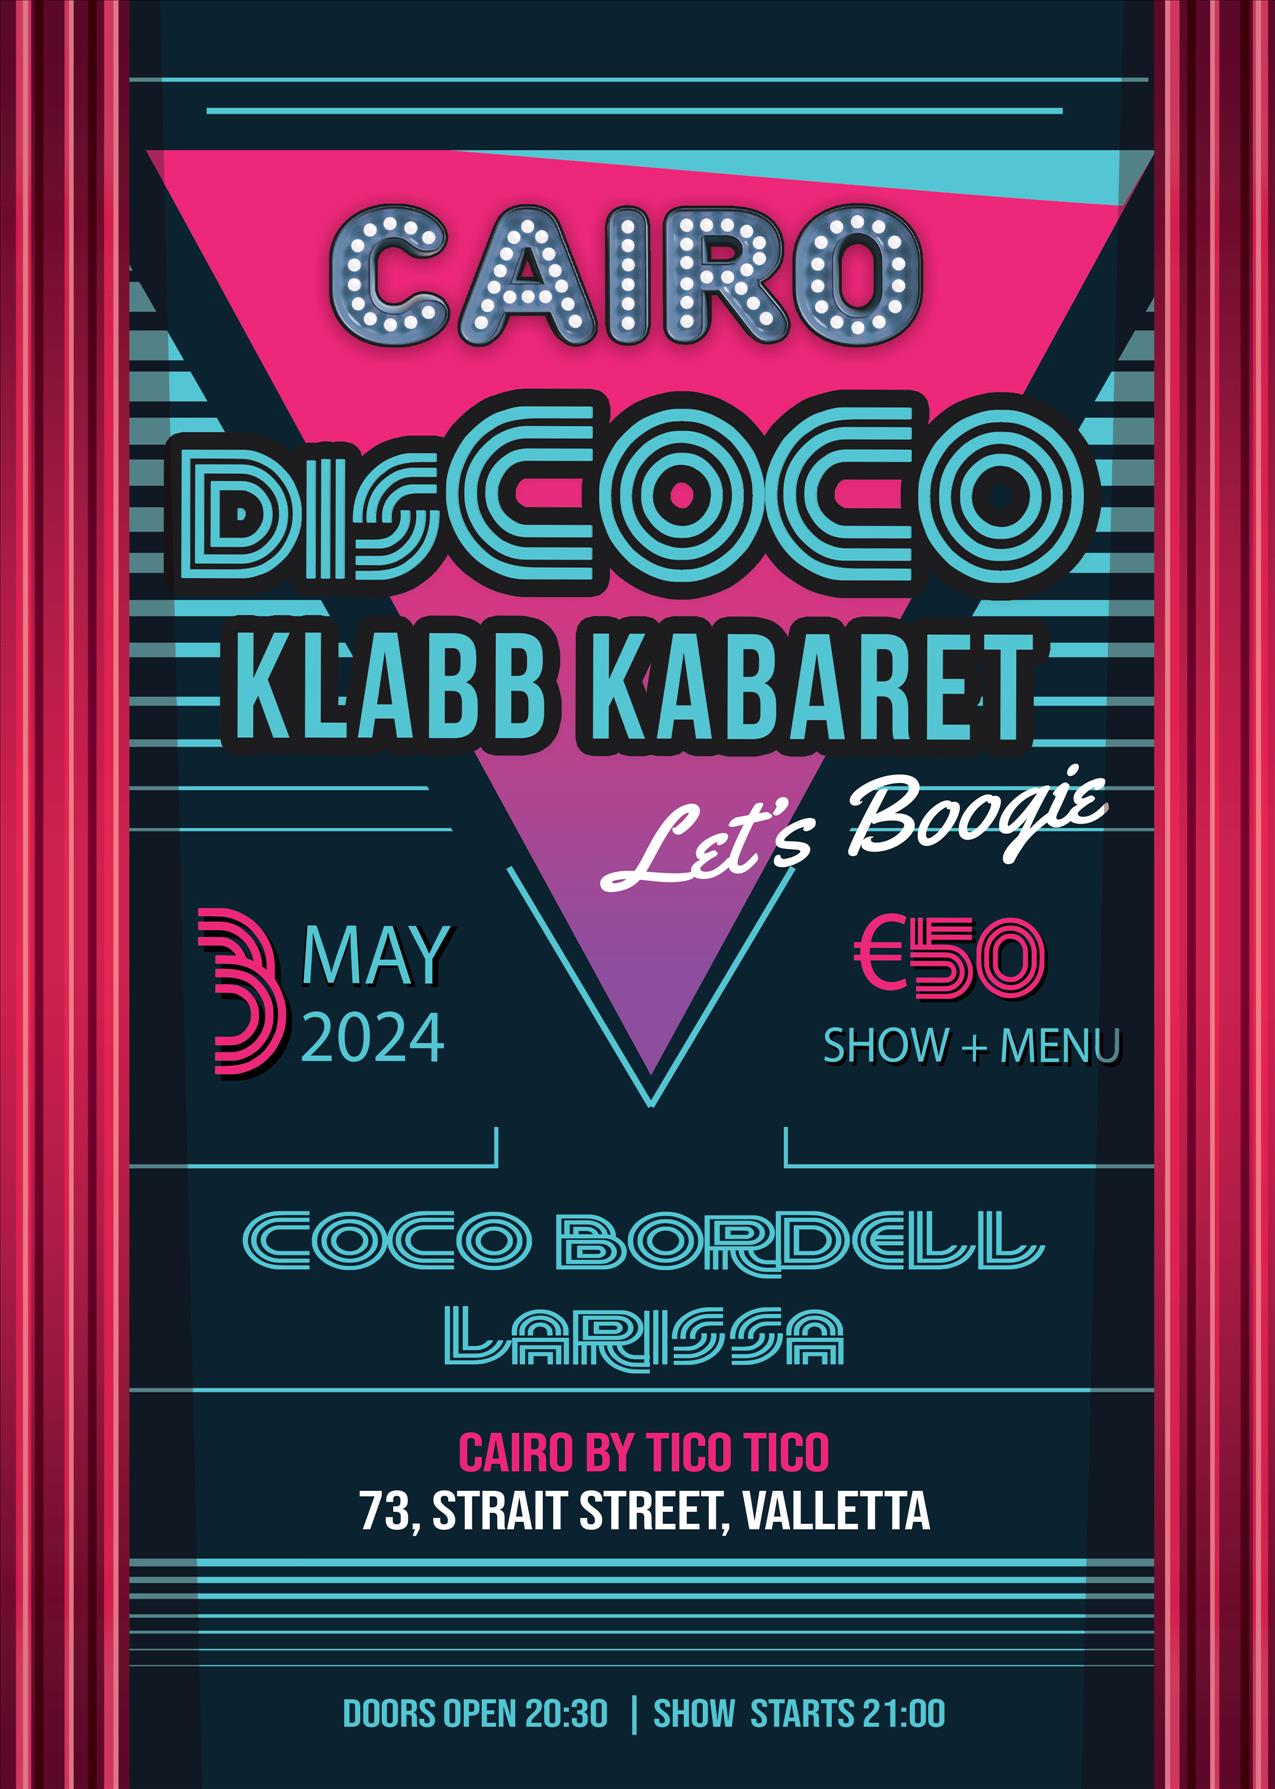 disCoco’s Klabb Kabaret - Let's Boogie at Cairo by Tico Tico poster